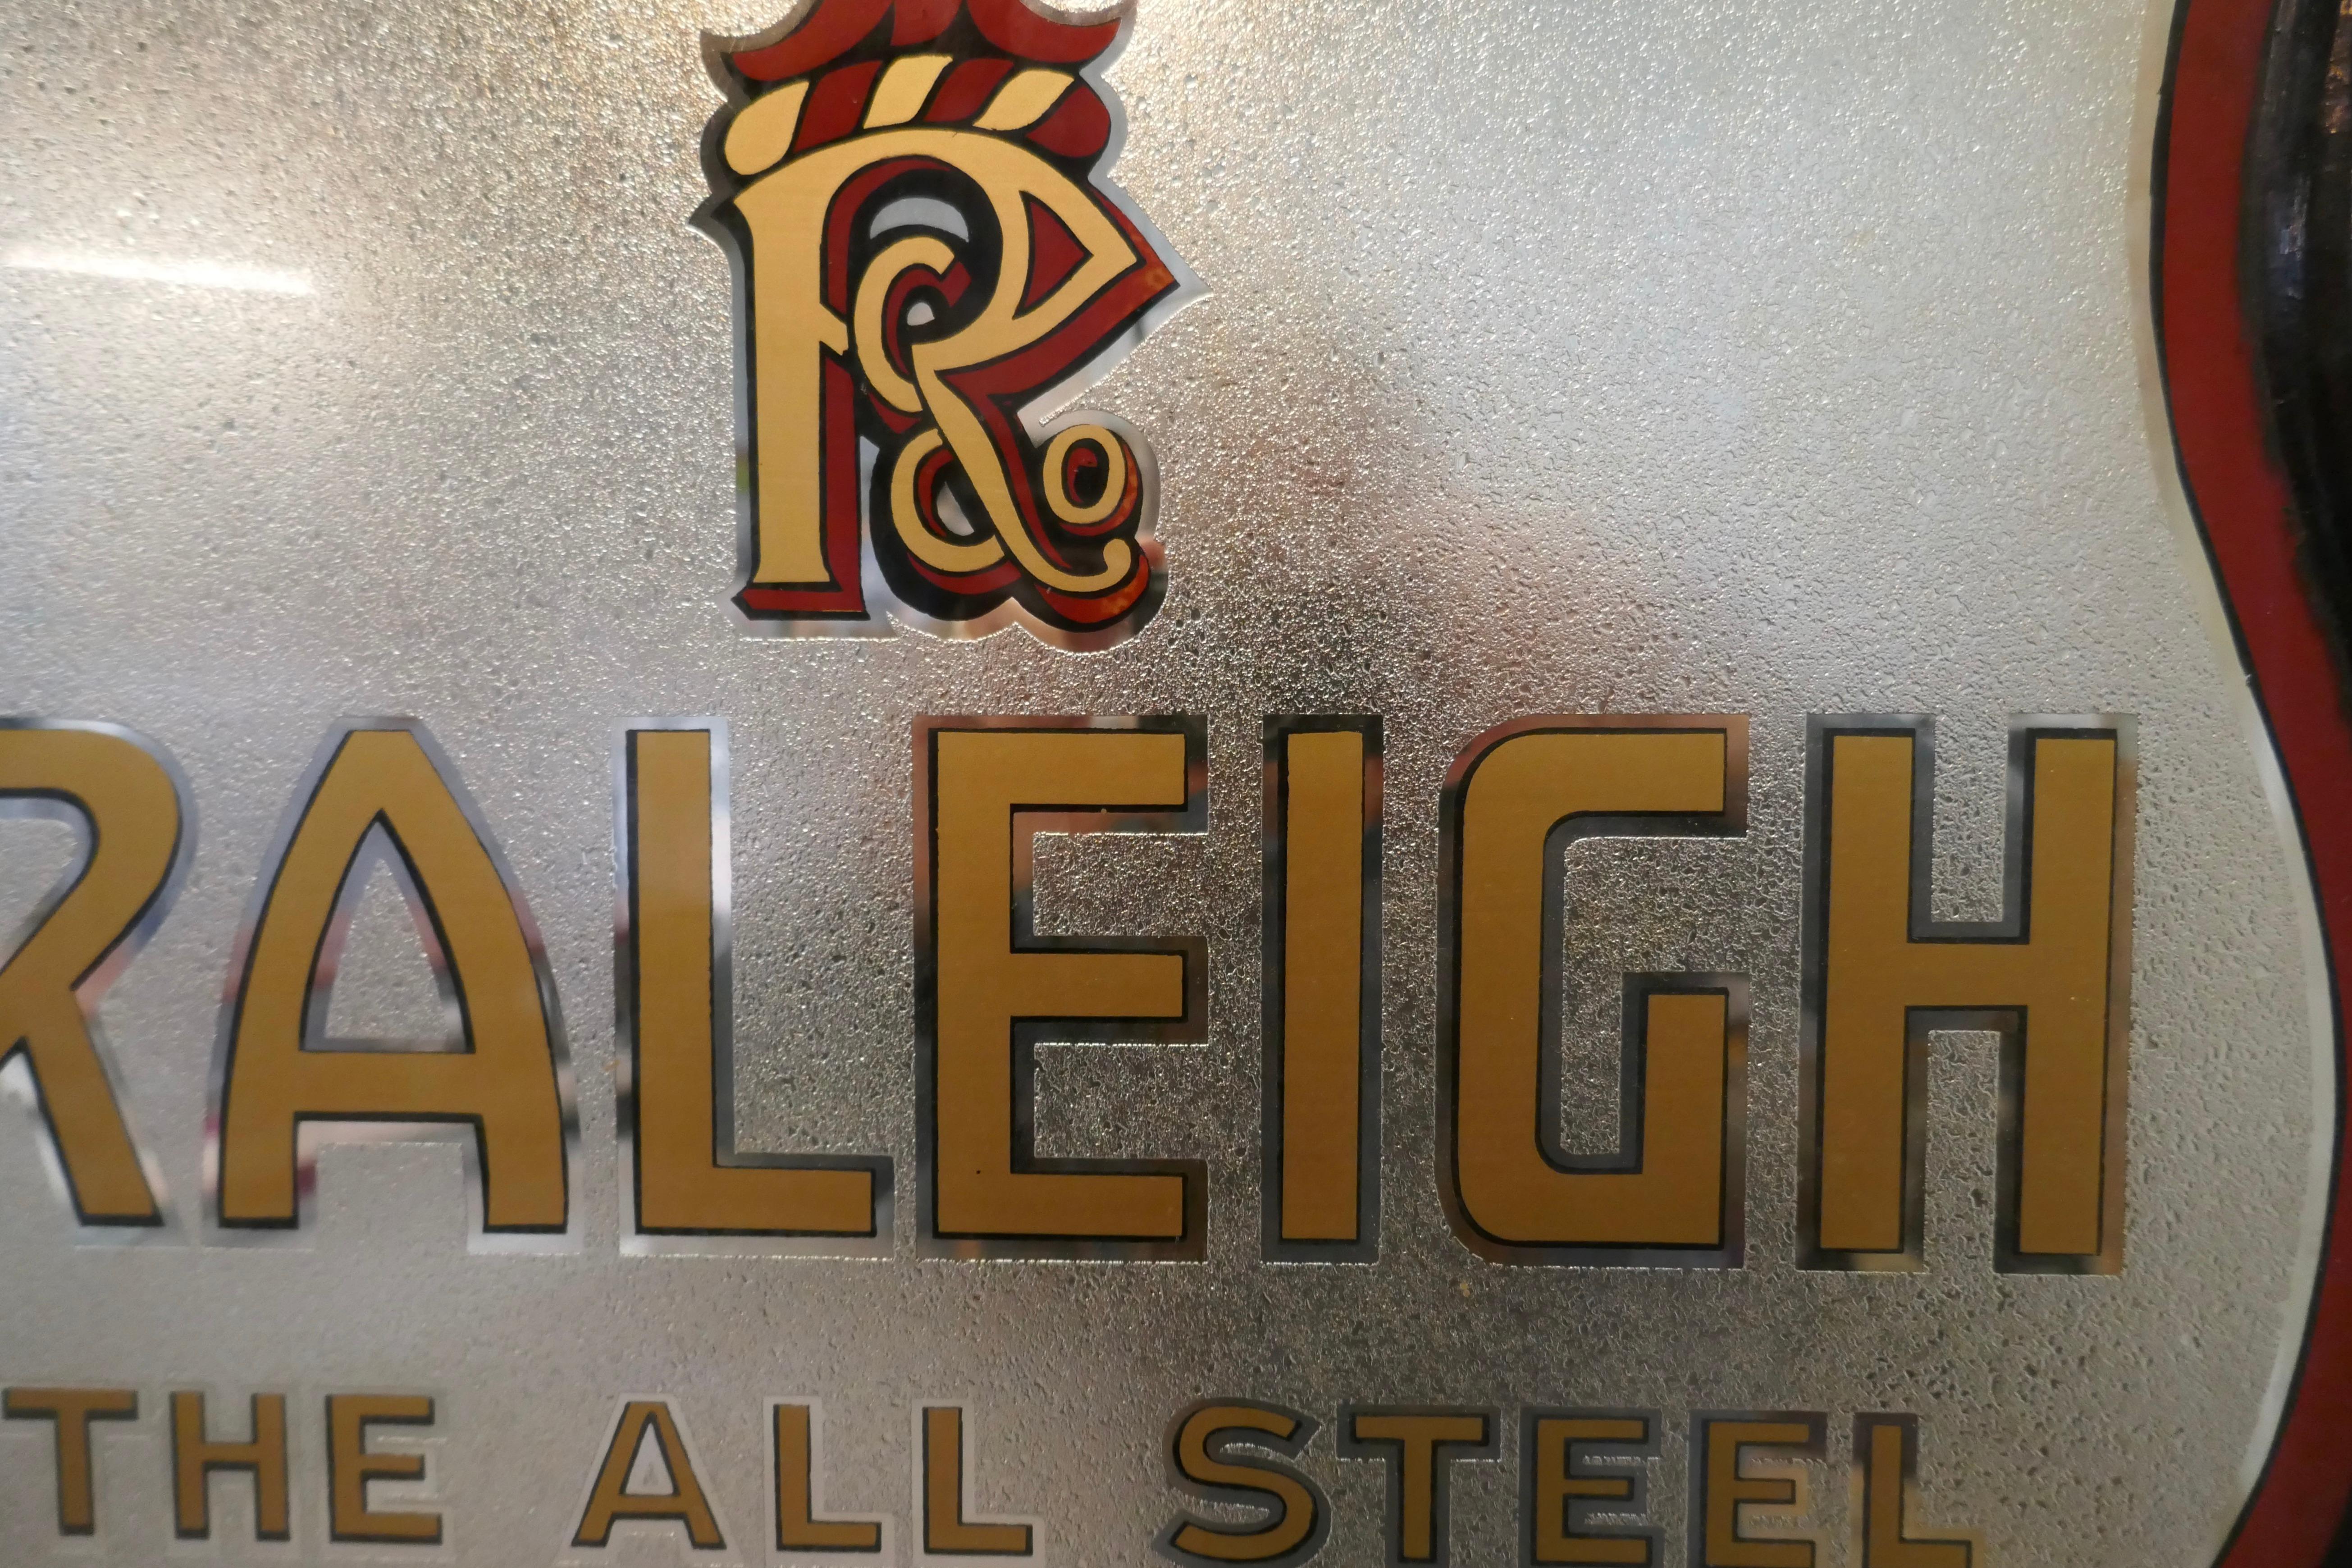 Very rare double sided glass Raleigh bike advertising shop sign

This is a beautiful Raleigh bike advertising shop sign, it is made in in a crackle finish mirror with enameled text in red and dark yellow

A great piece, dating back to the 1920s